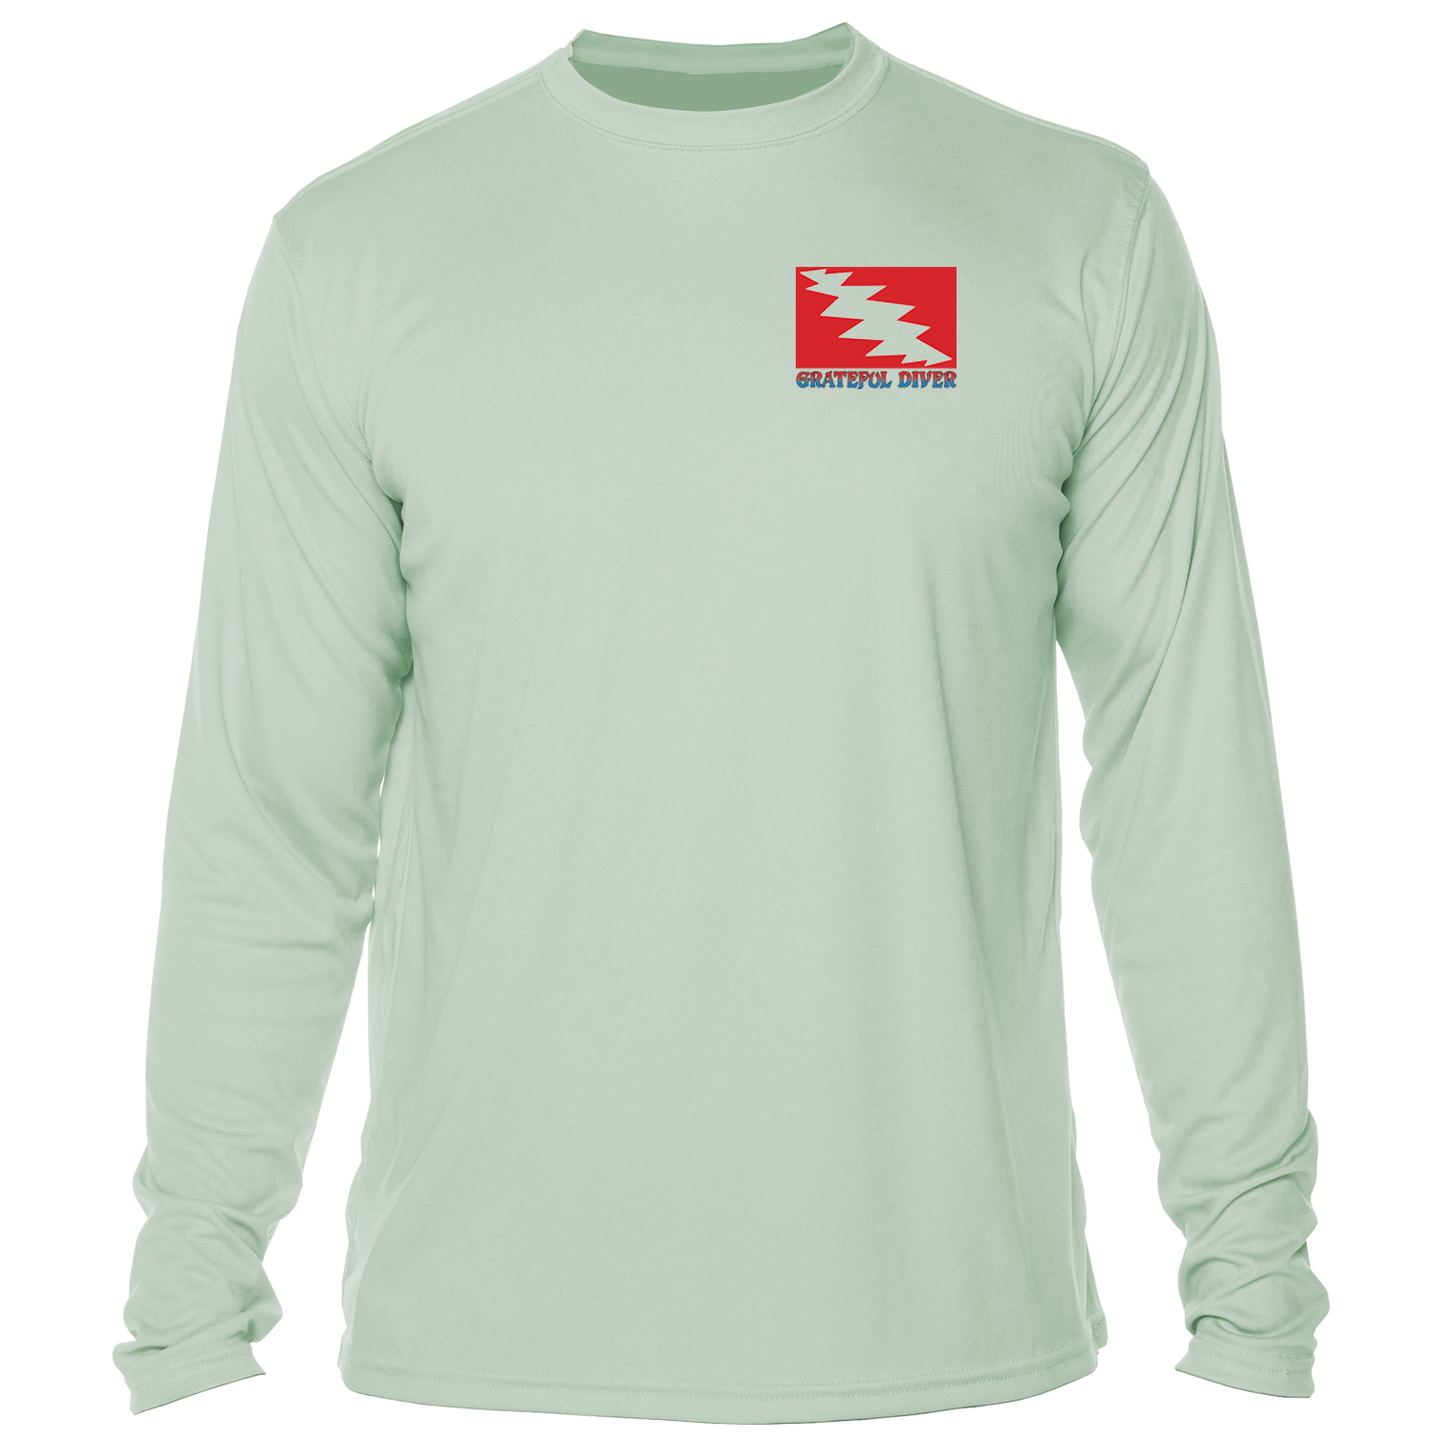 front of Grateful Diver's Artist's Collection: Island Life UV Shirt in seagrass showing the classic dive flag logo